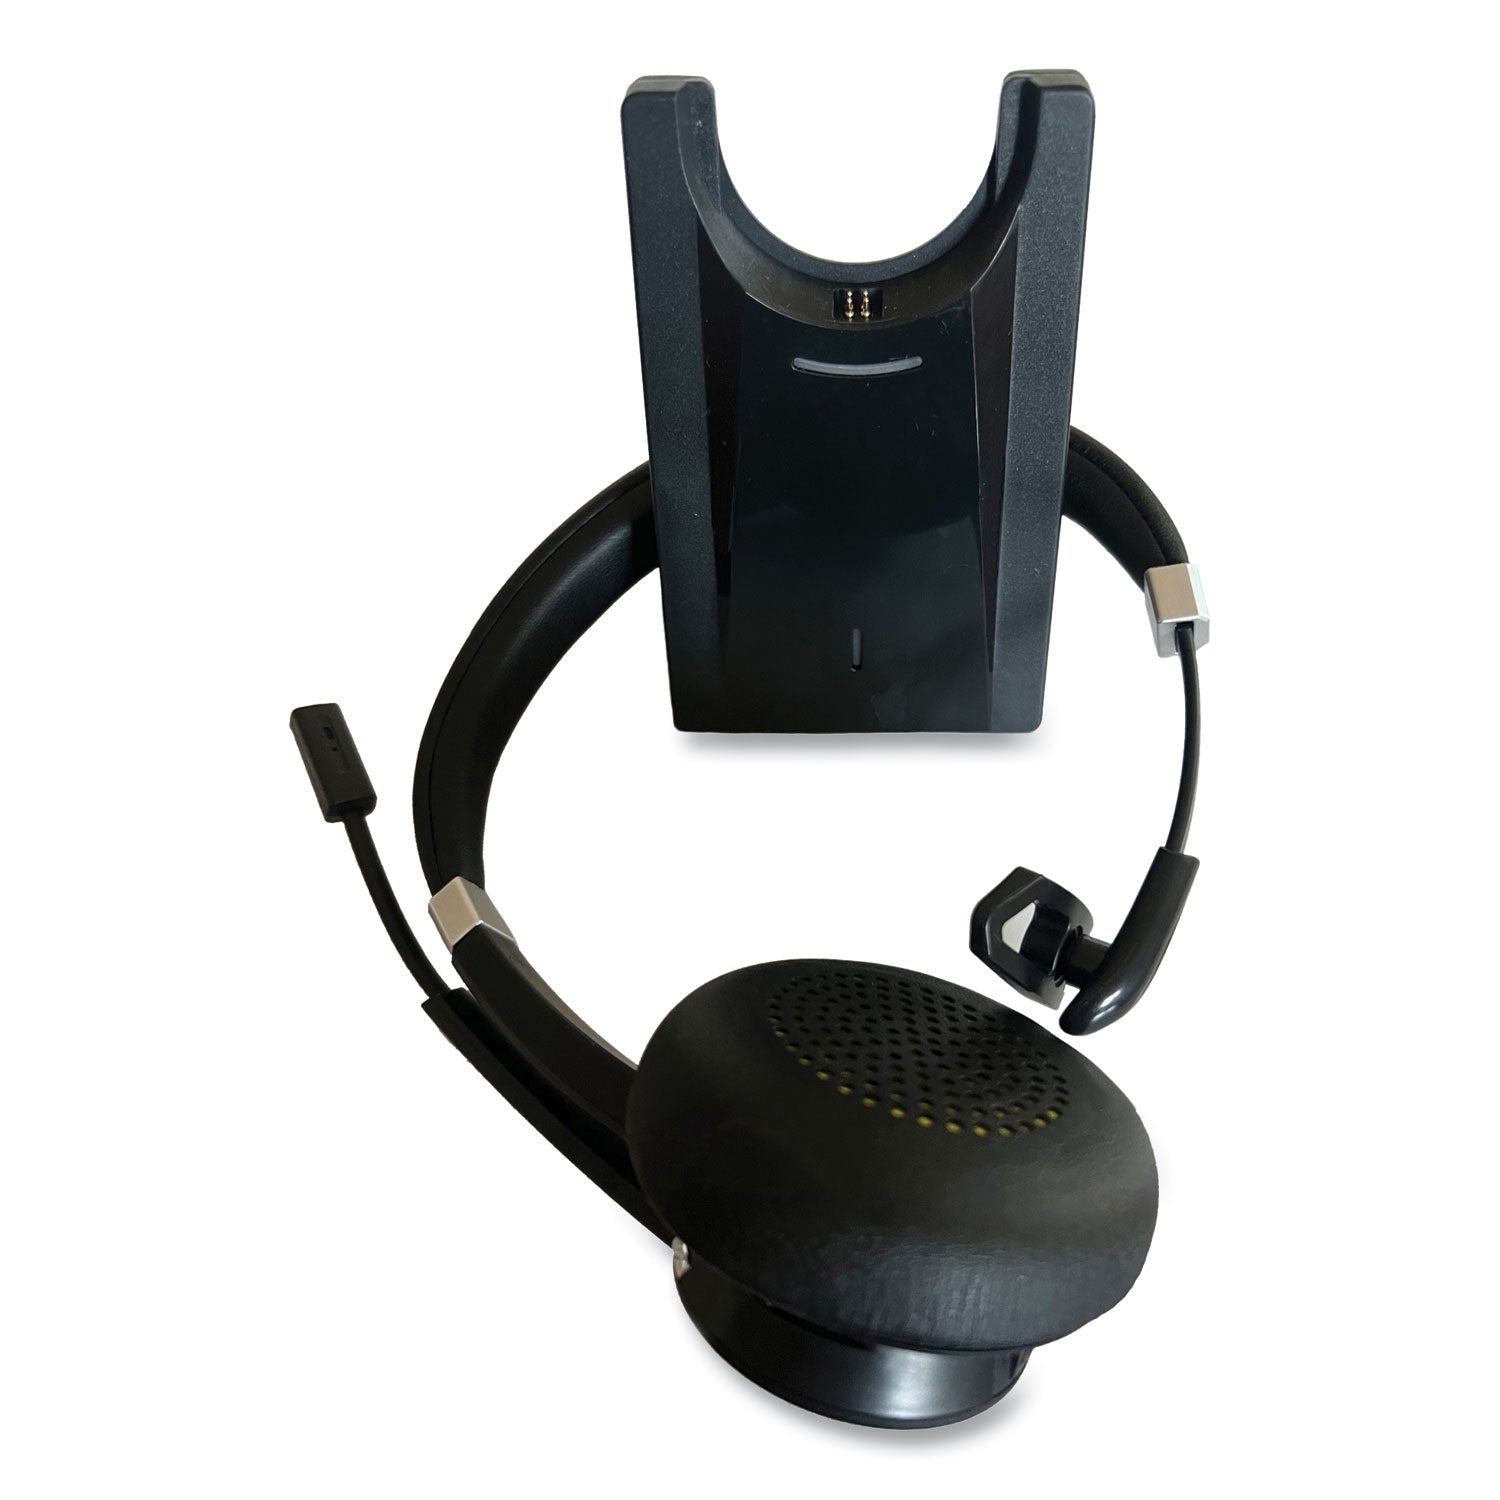 ivr70002-monaural-over-the-head-bluetooth-headset-black-silver_ivr70002 - 2